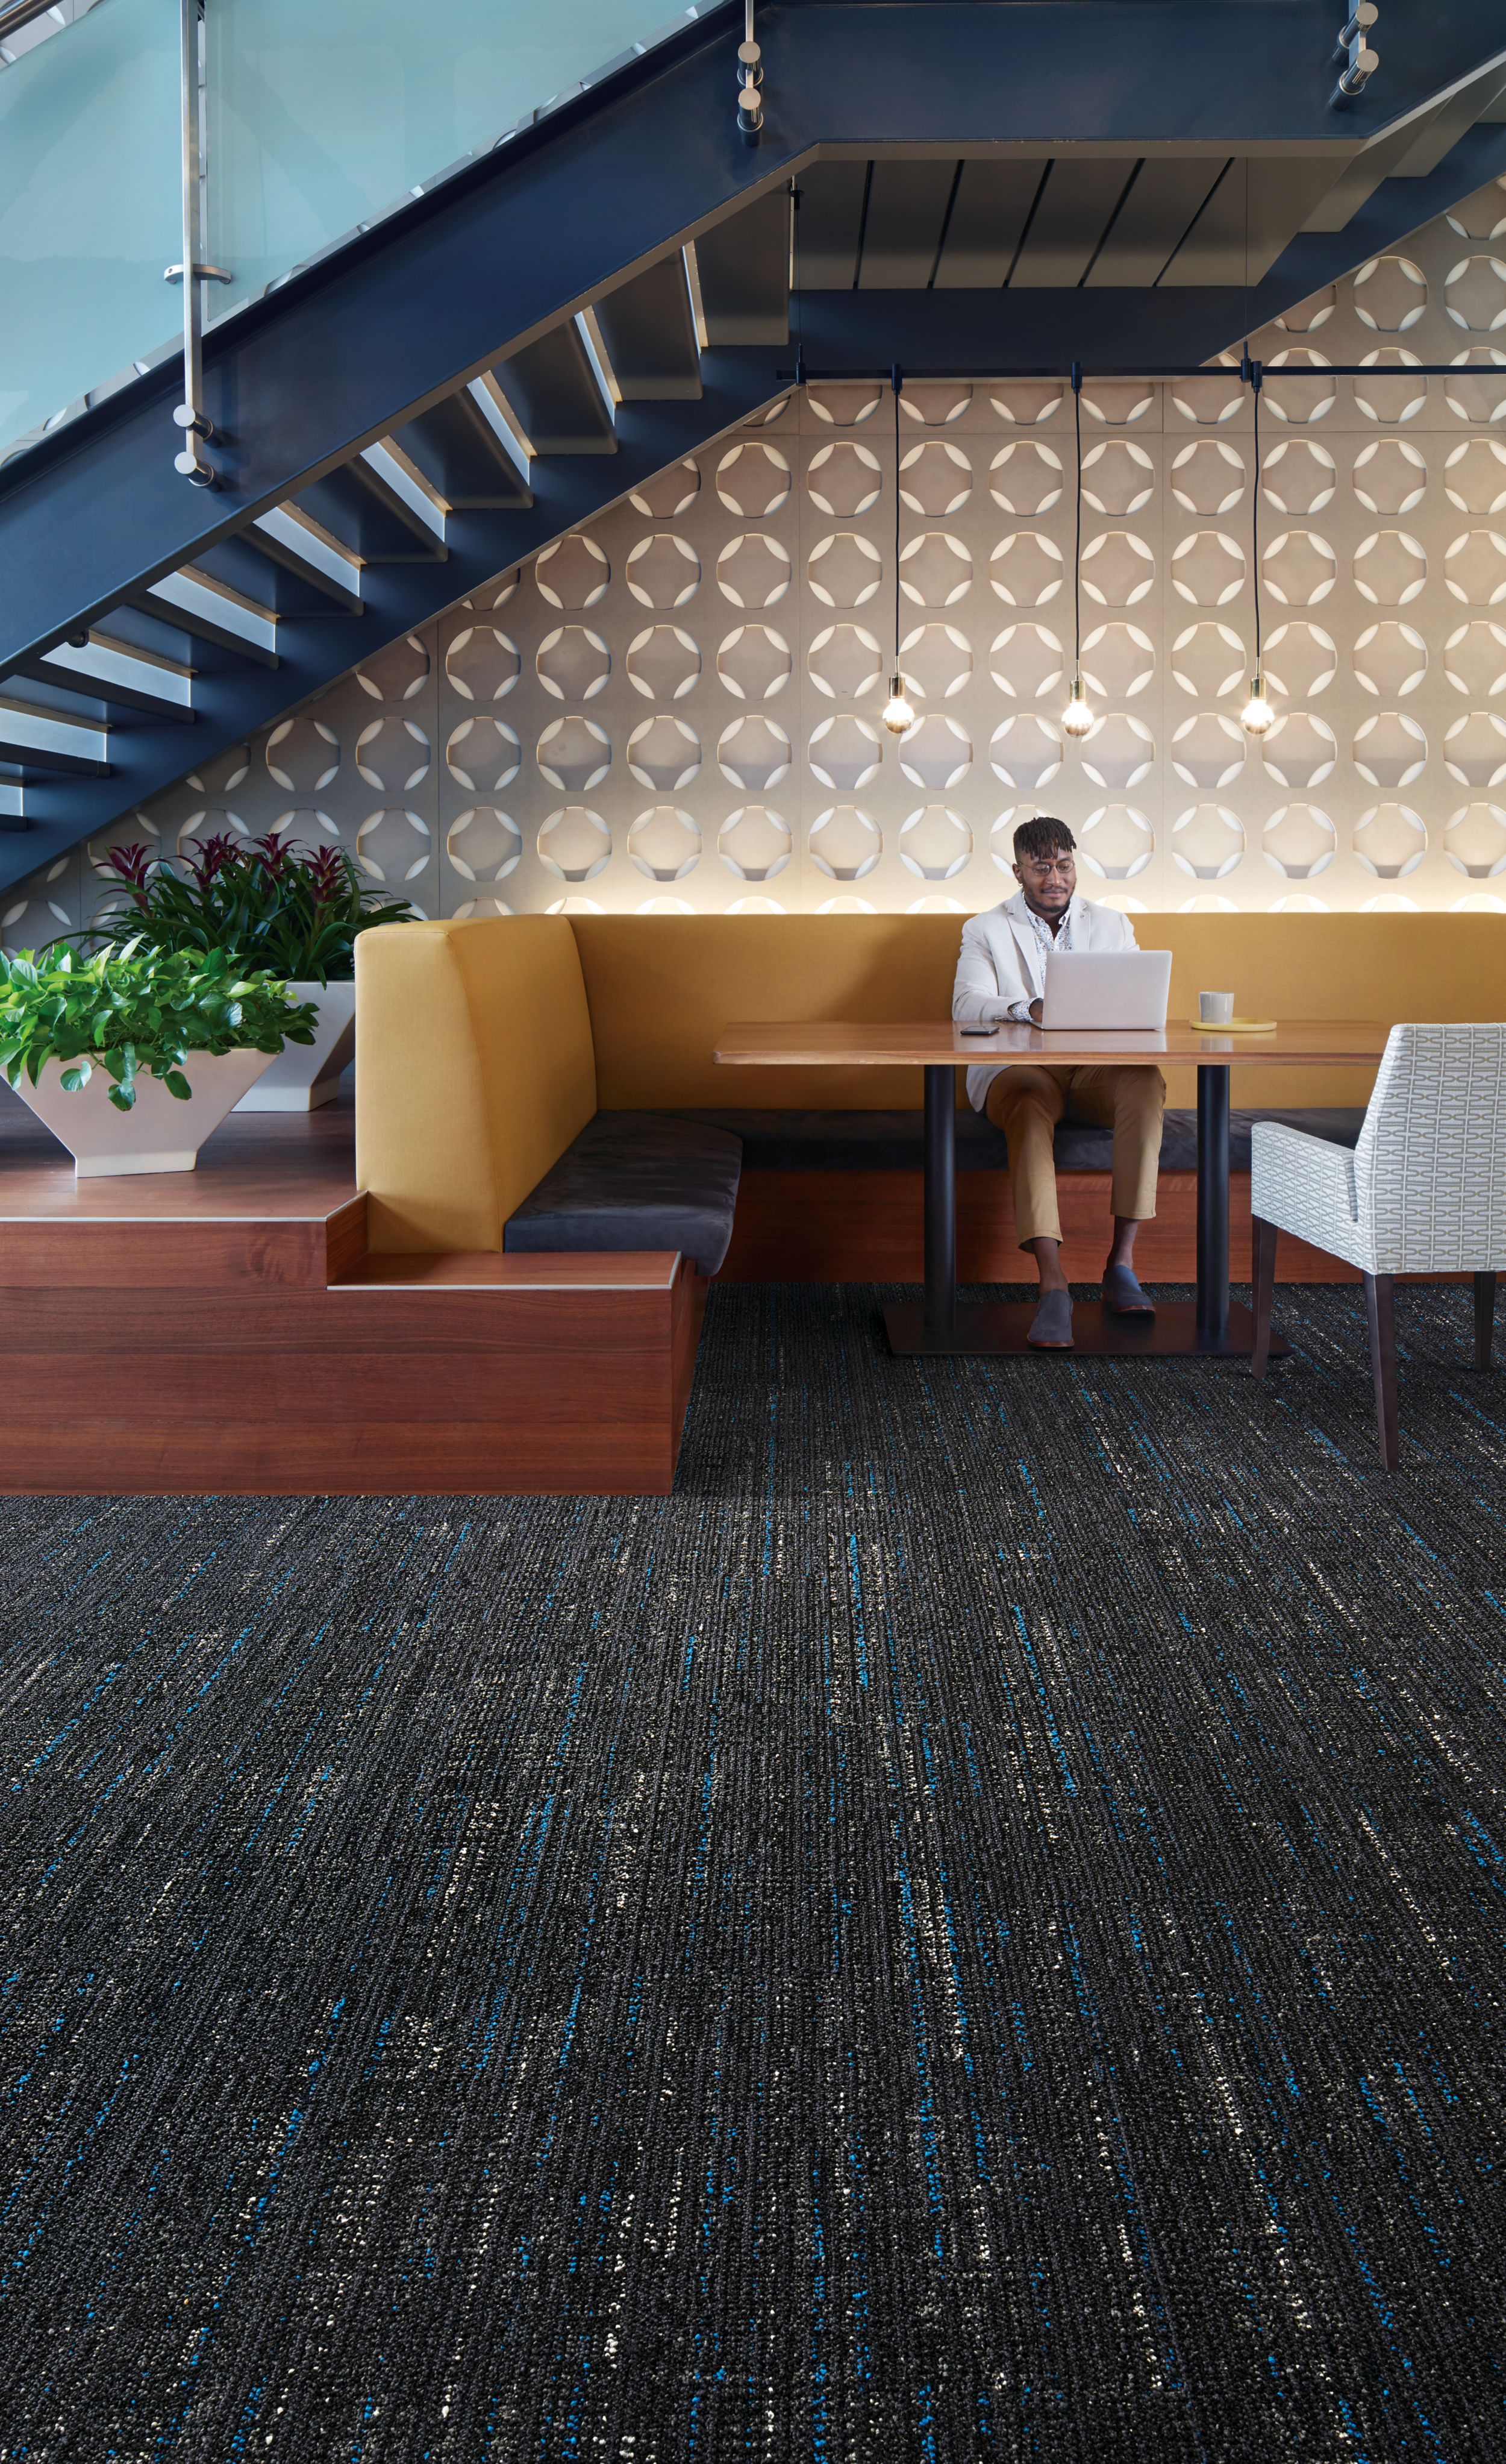 Interface Bitrate plank carpet tile in seating area with stairwell image number 6